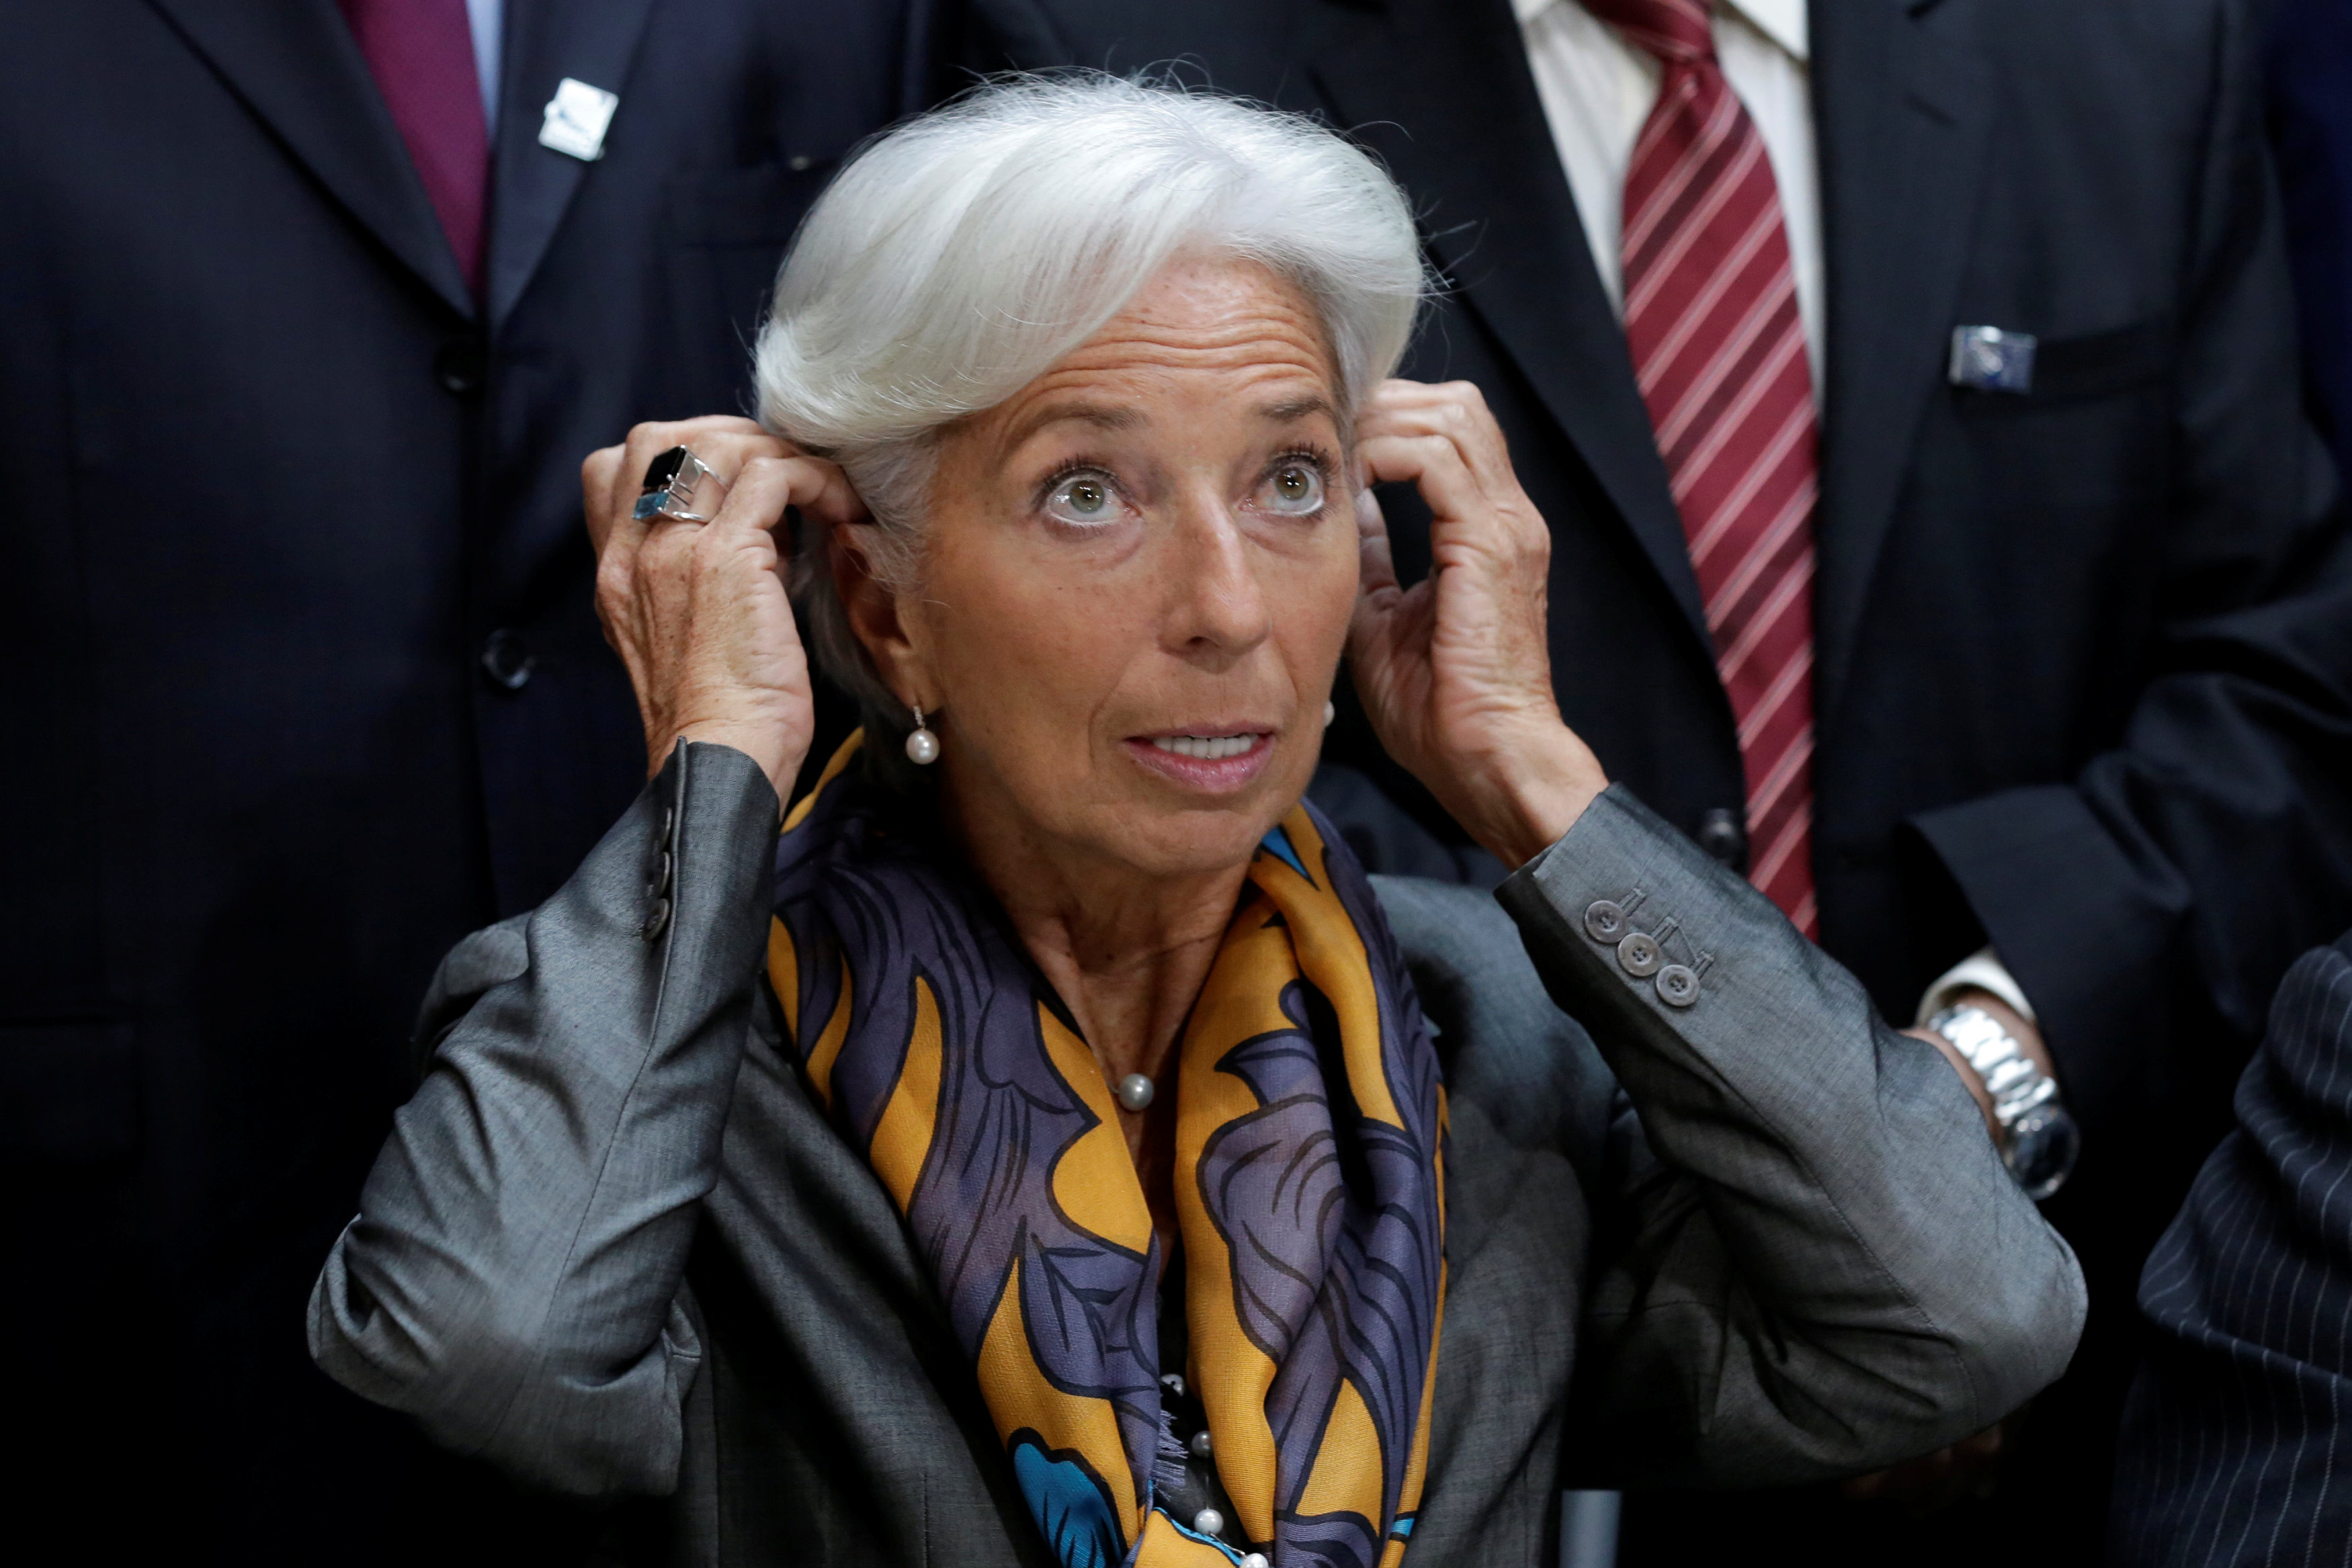 IMF's steering committee warns against complacency, says global economic recovery incomplete